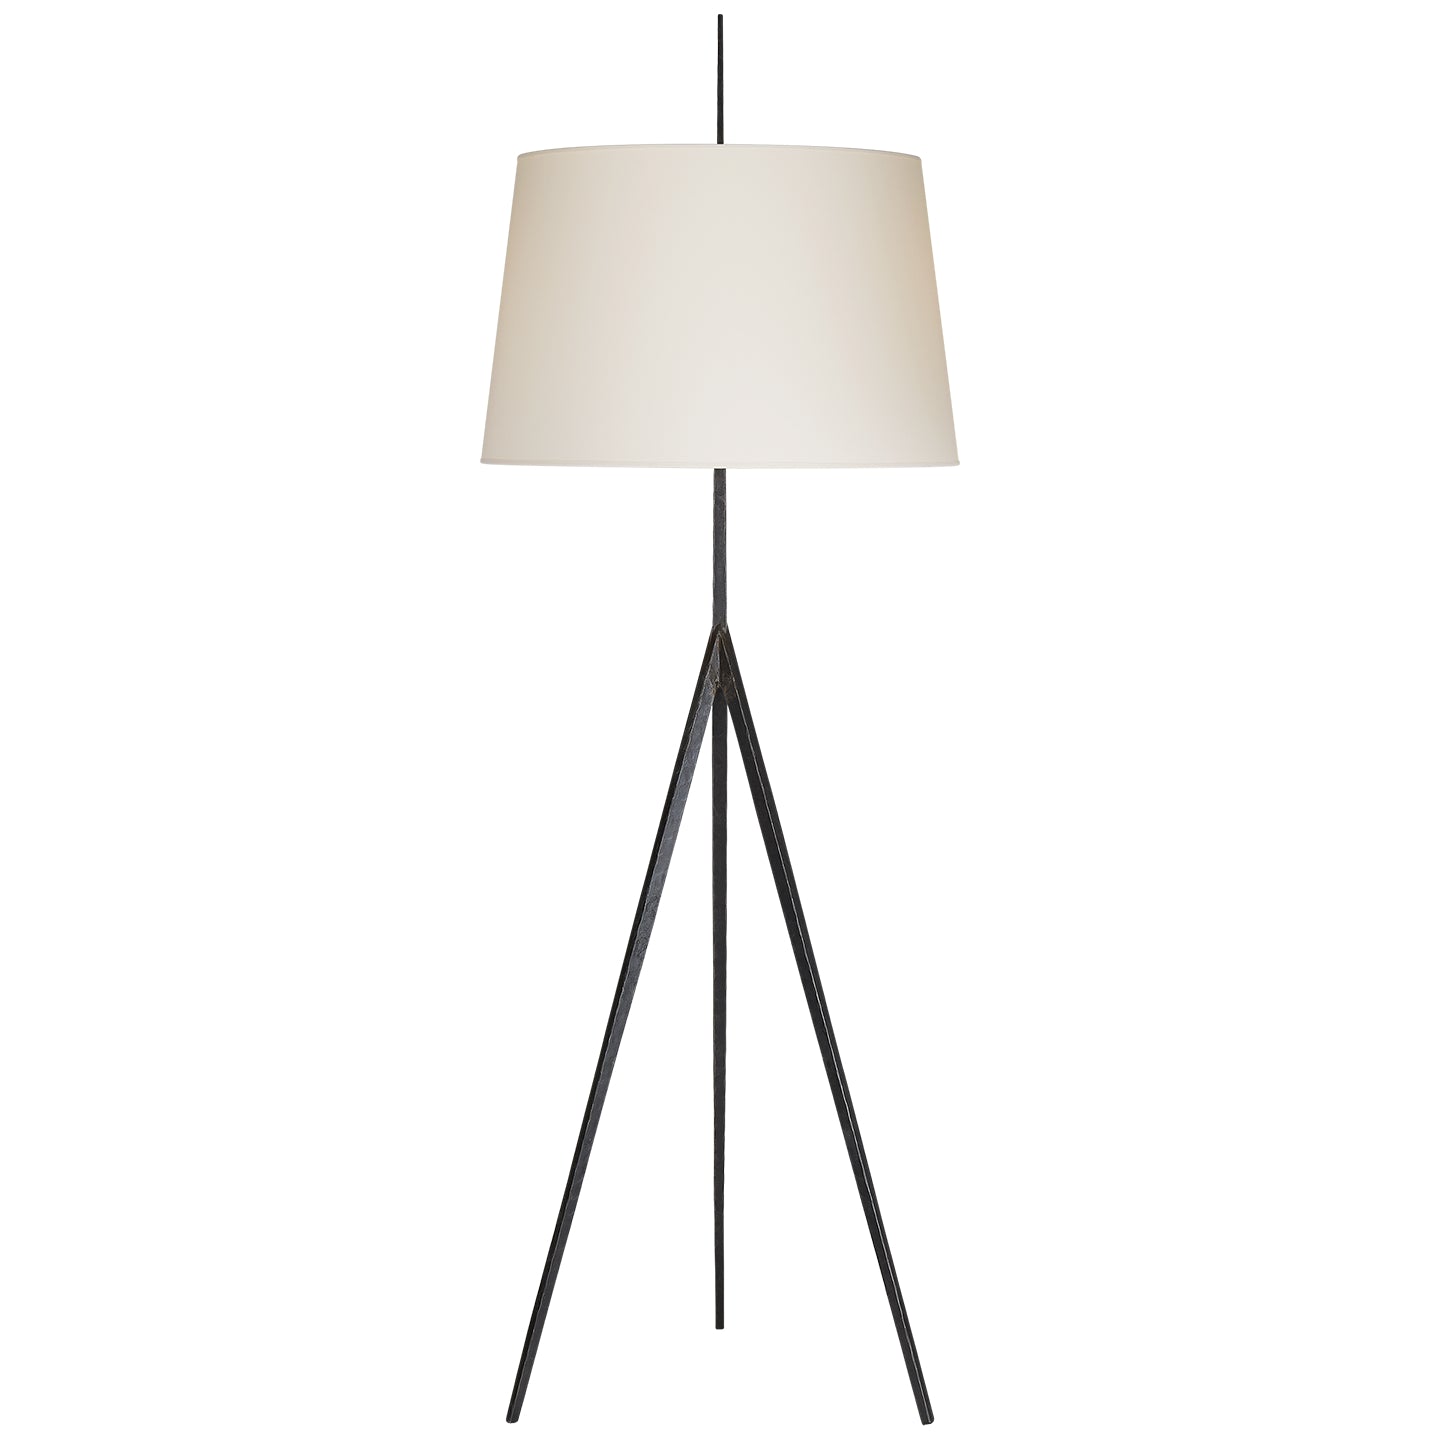 Load image into Gallery viewer, Visual Comfort Signature - S 1641AI-PL - One Light Floor Lamp - Triad - Aged Iron
